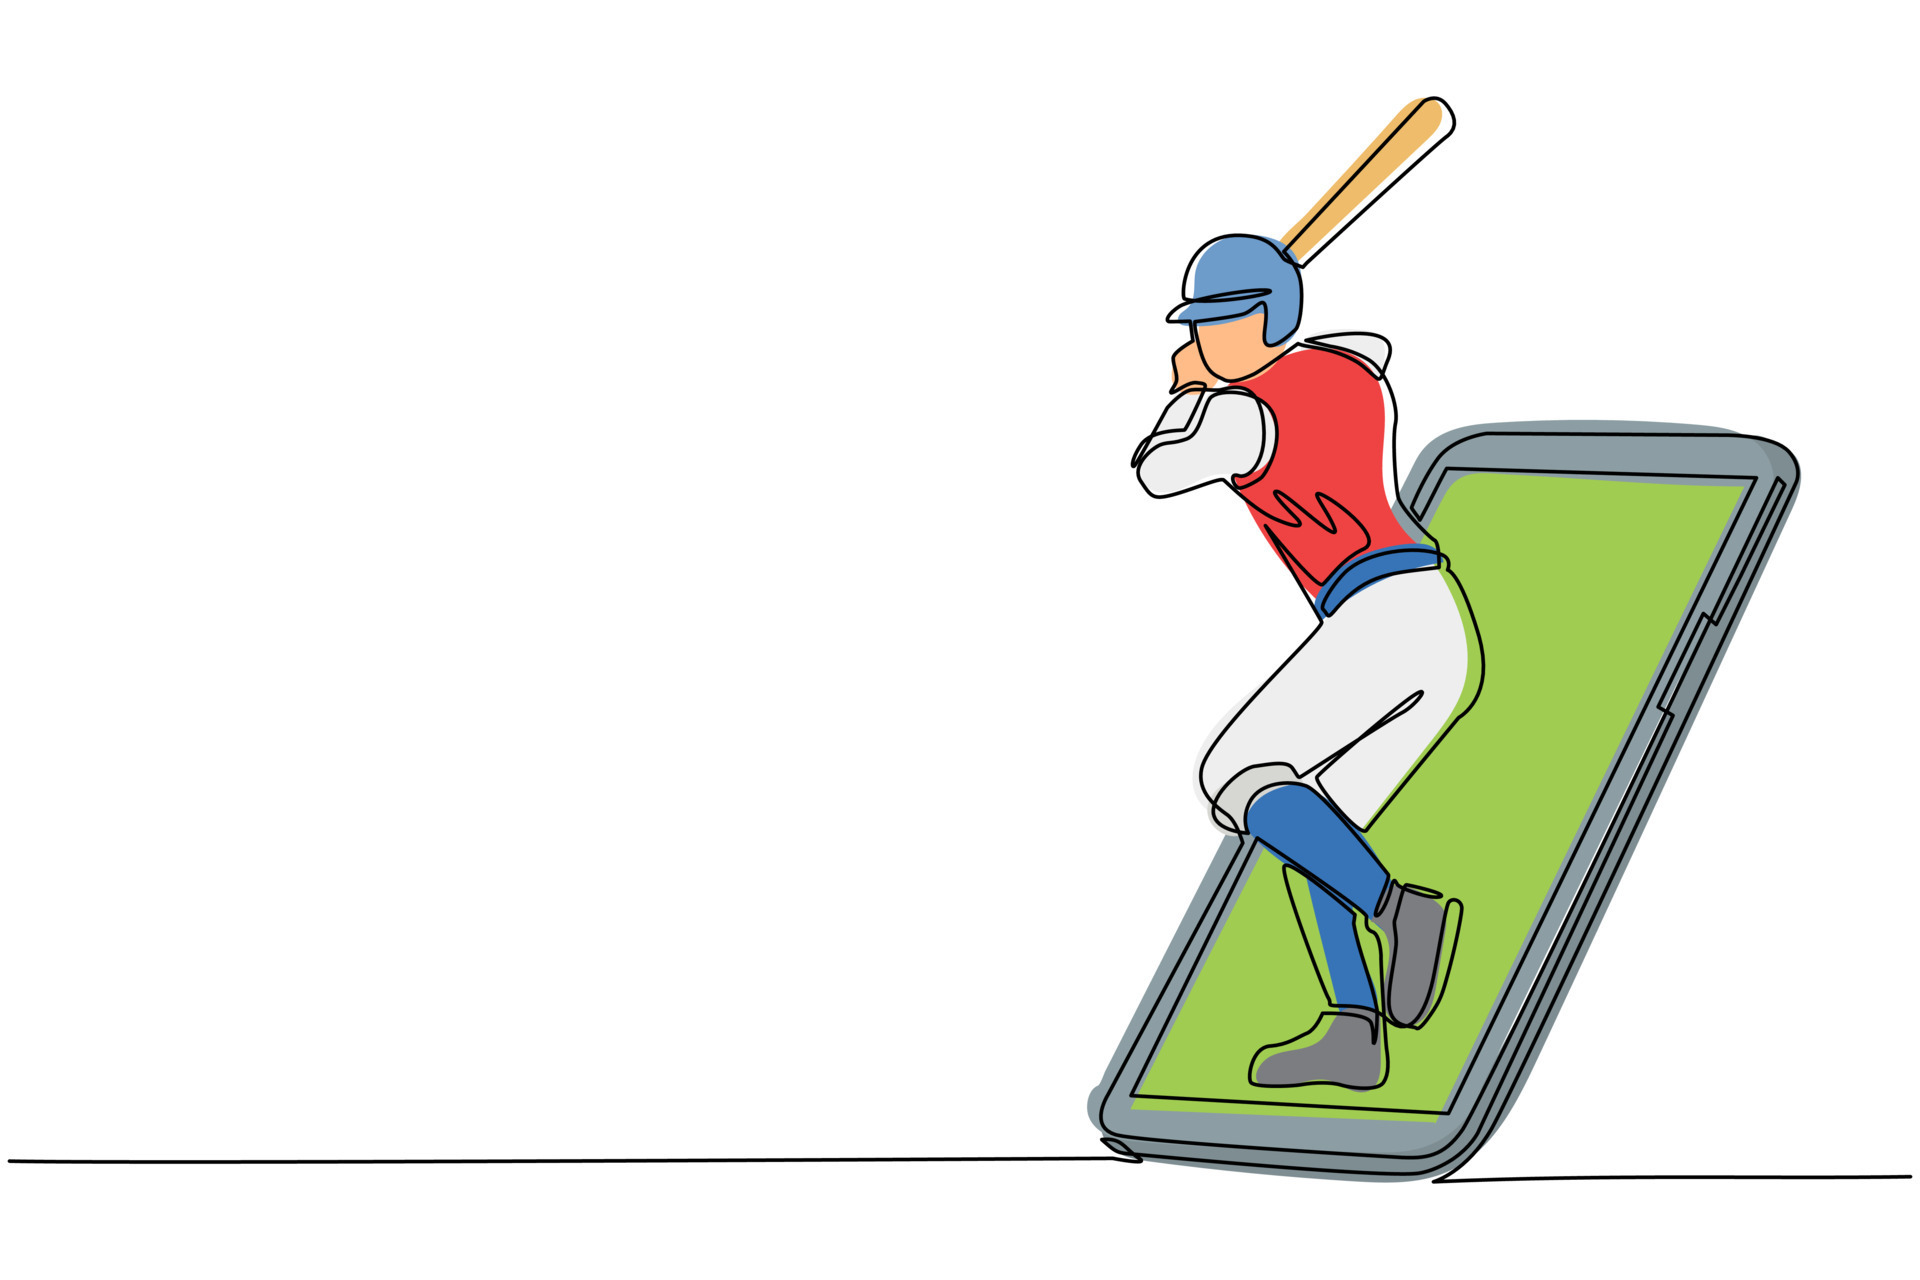 Continuous one line drawing man baseball player ready to hit the ball getting out of smartphone screen. Mobile sports play matches